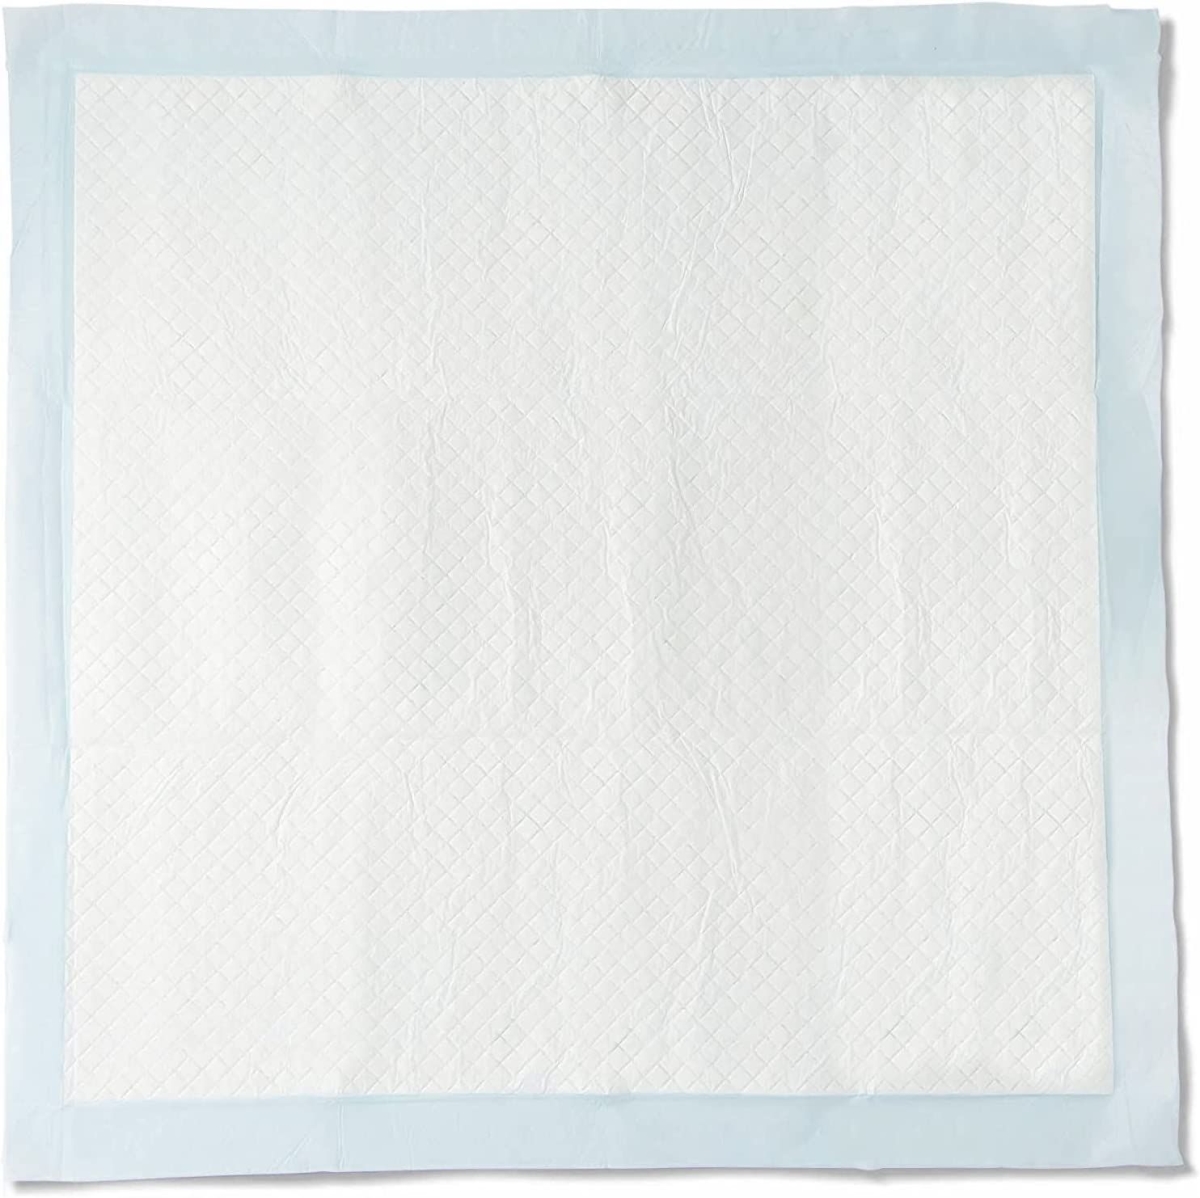 Picture of DMI 560-7097-1900 36 x 36 in. Absorbent Disposable Underpads - Pack of 50